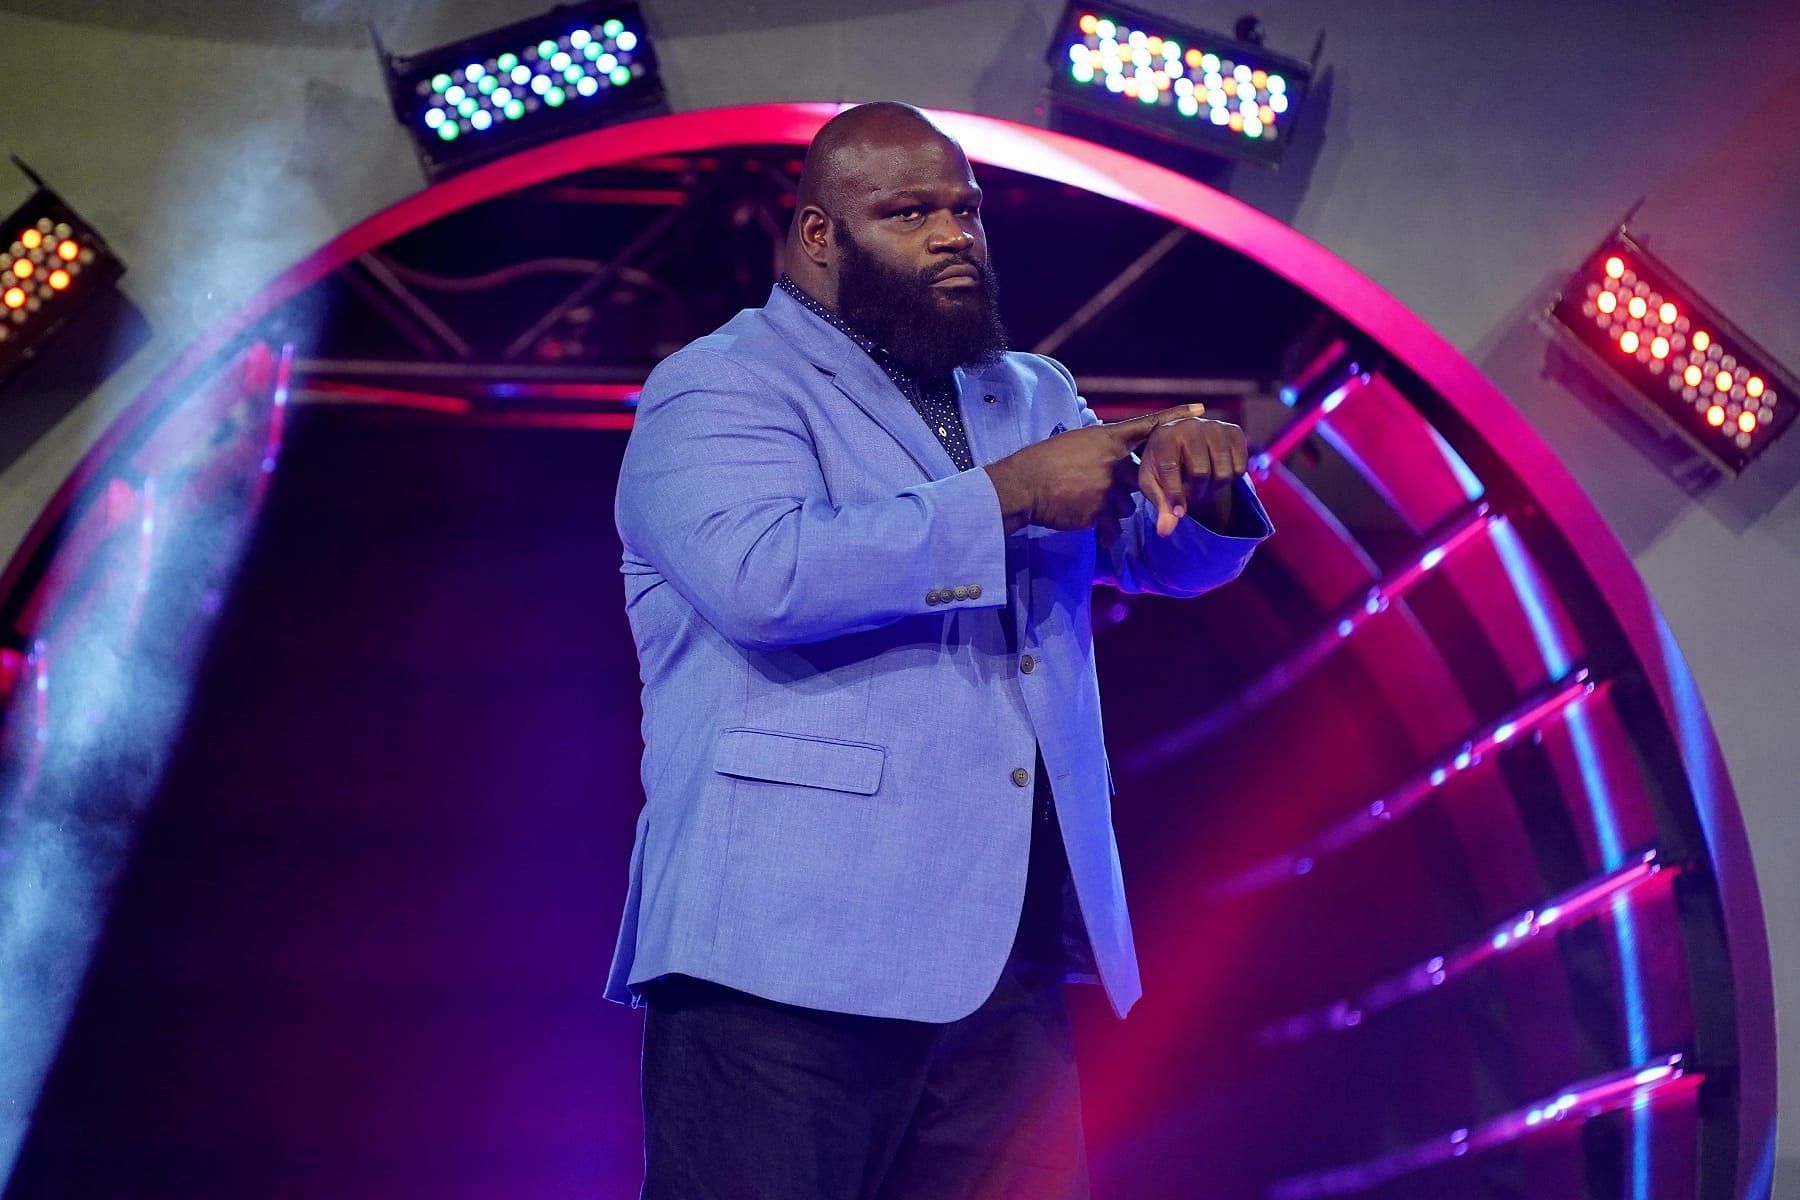 Mark Henry is currently a coach and presenter for AEW